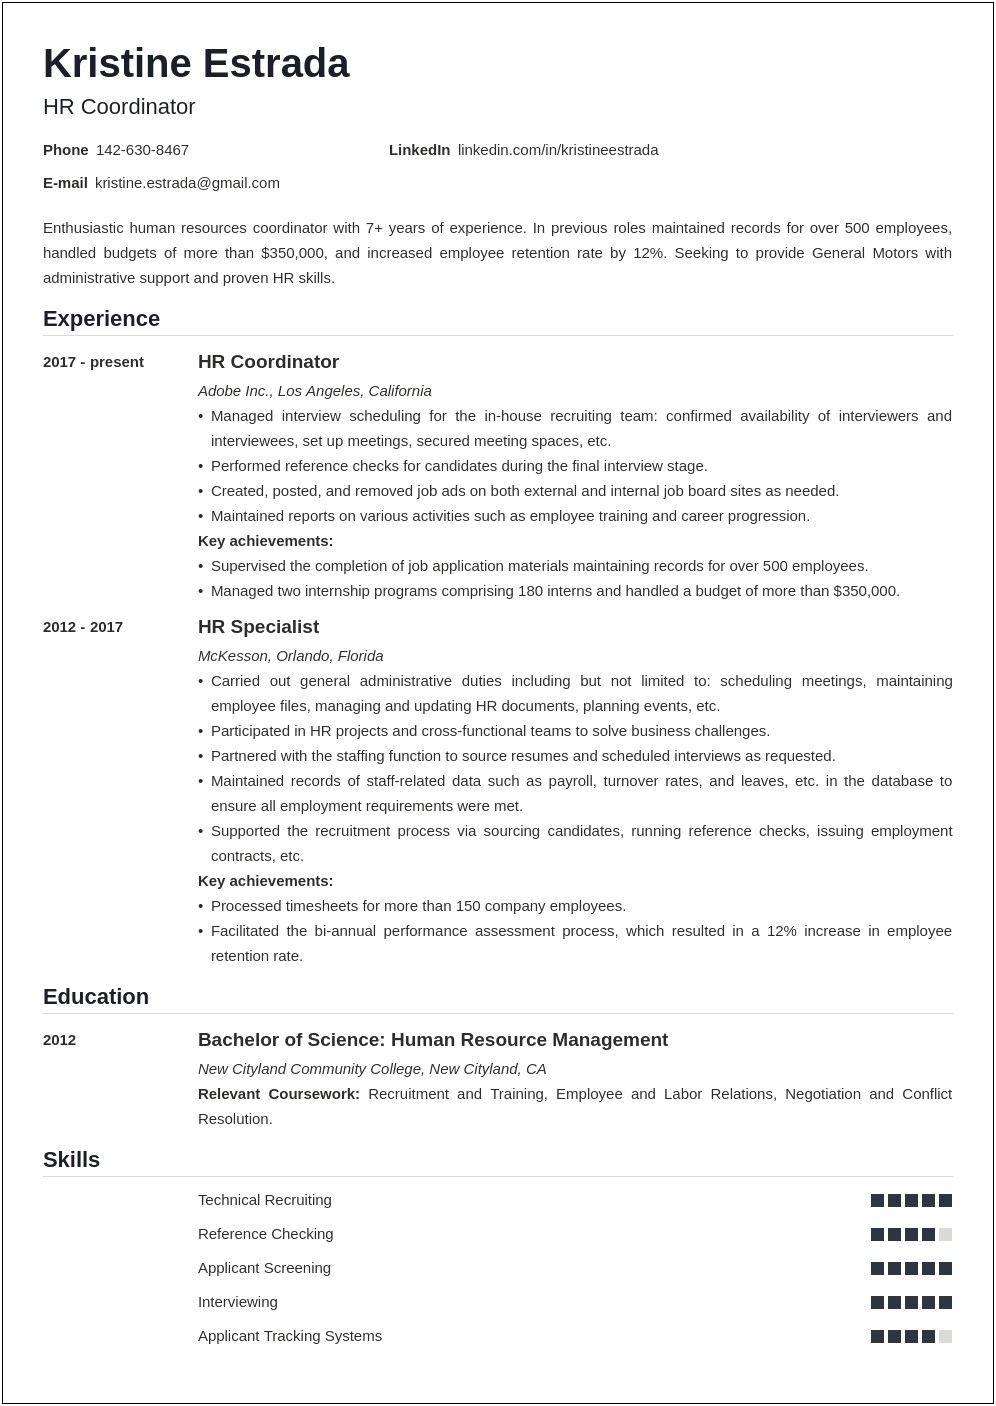 Resume Objective For Coordinator Position